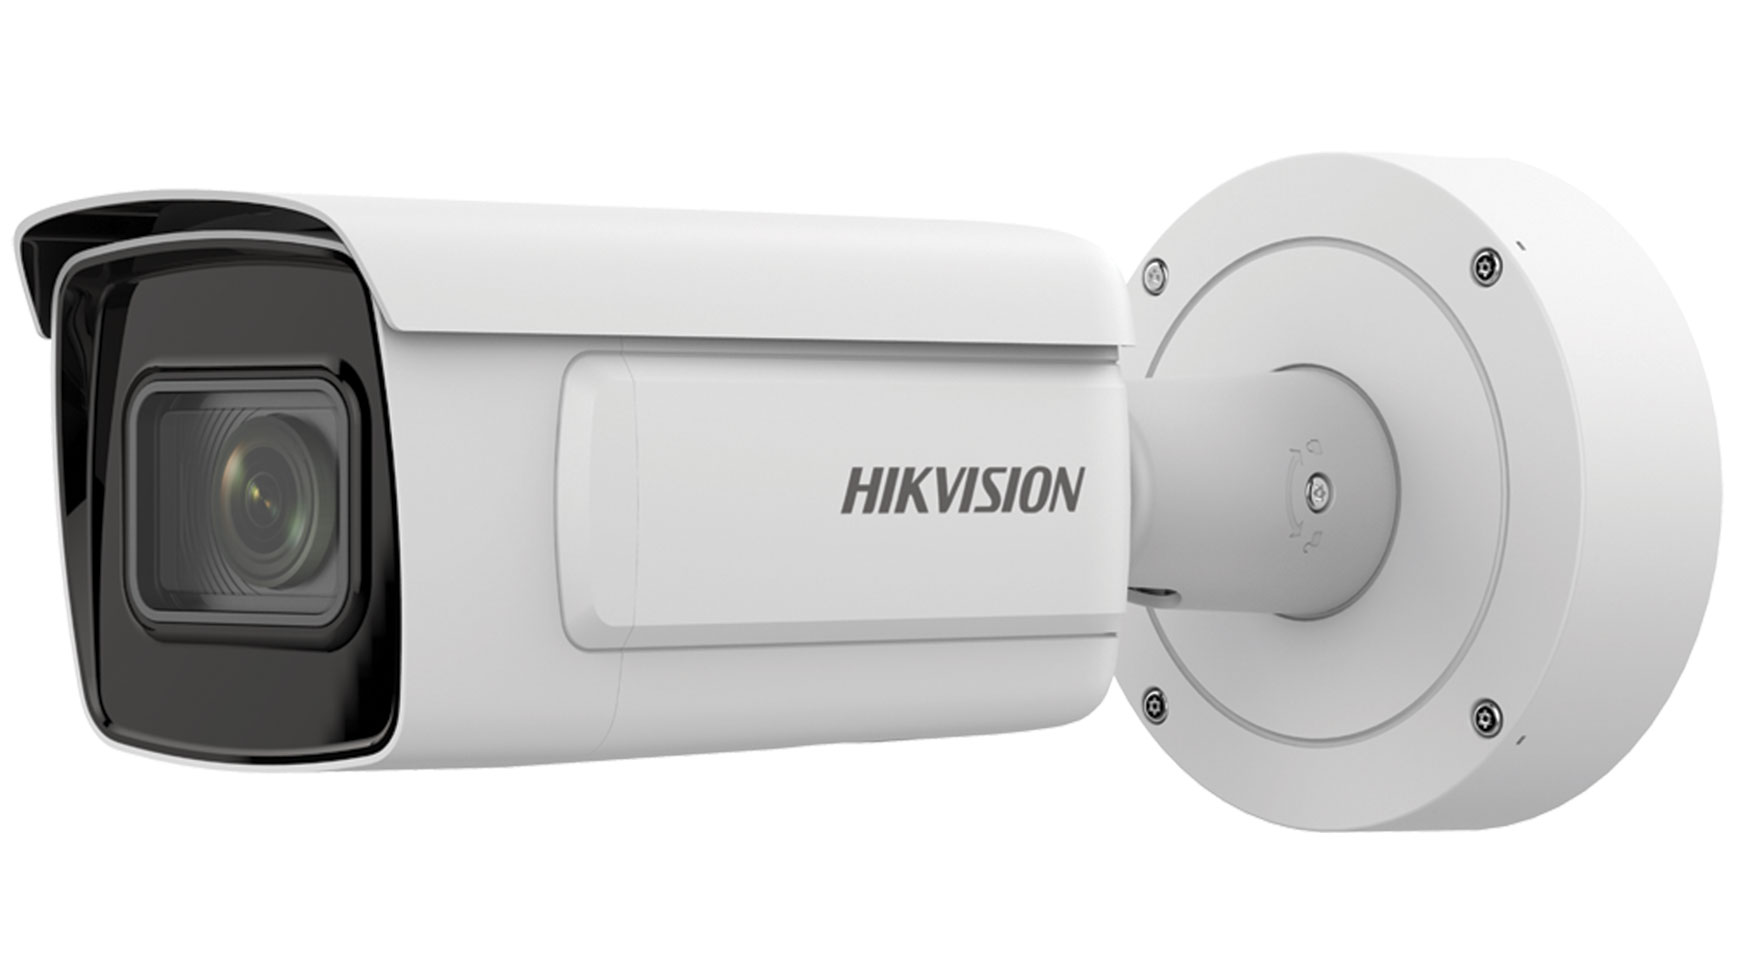 Hikvision iDS-2CD7A26G0/P-IZHSY(8-32mm)(C)